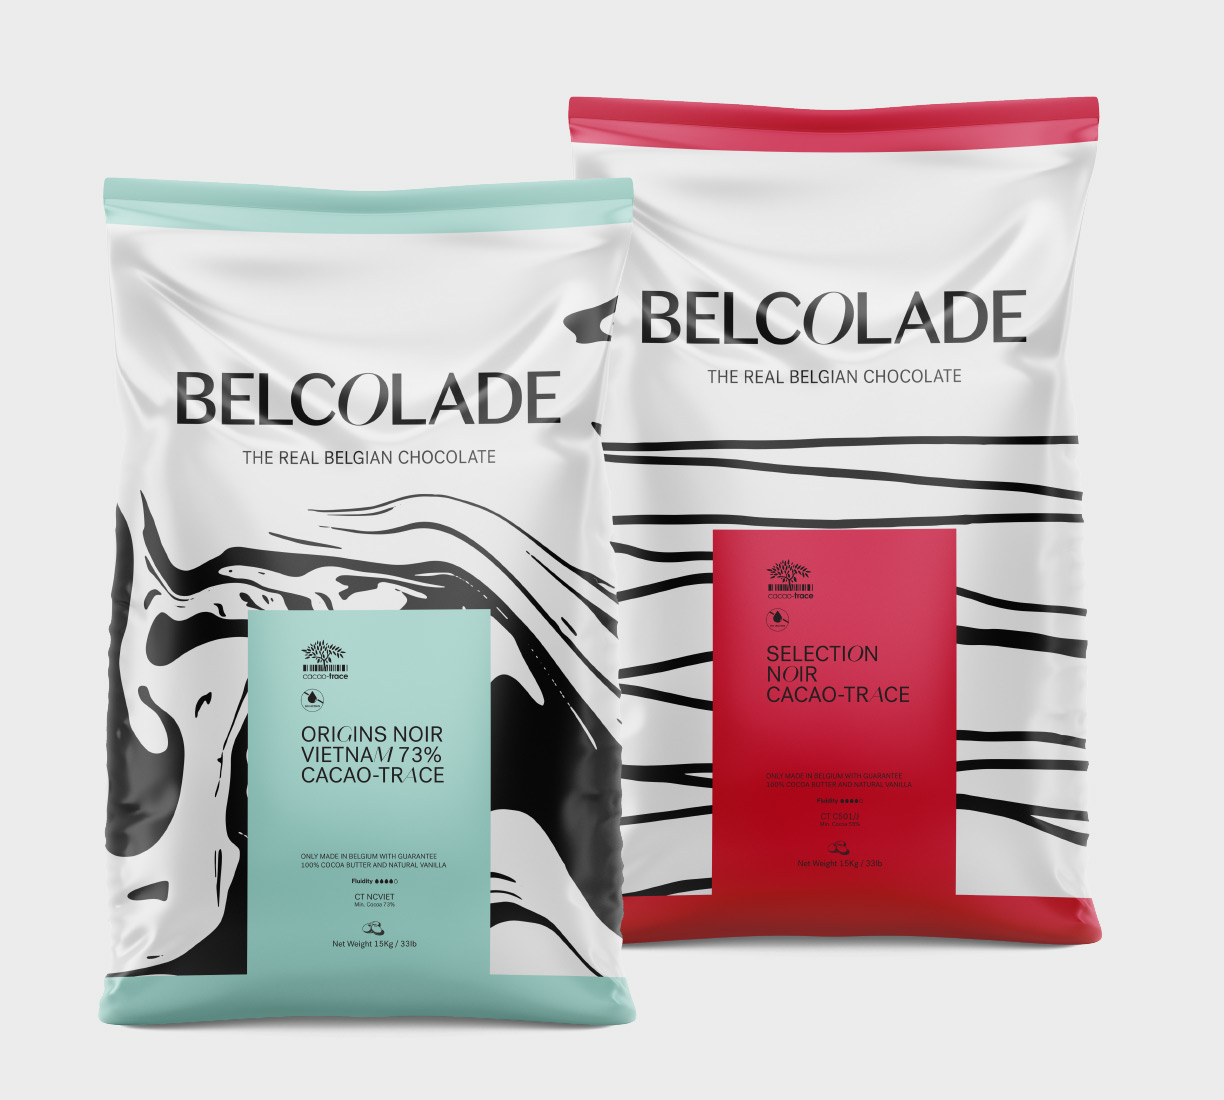 nuovo packaging belcolade